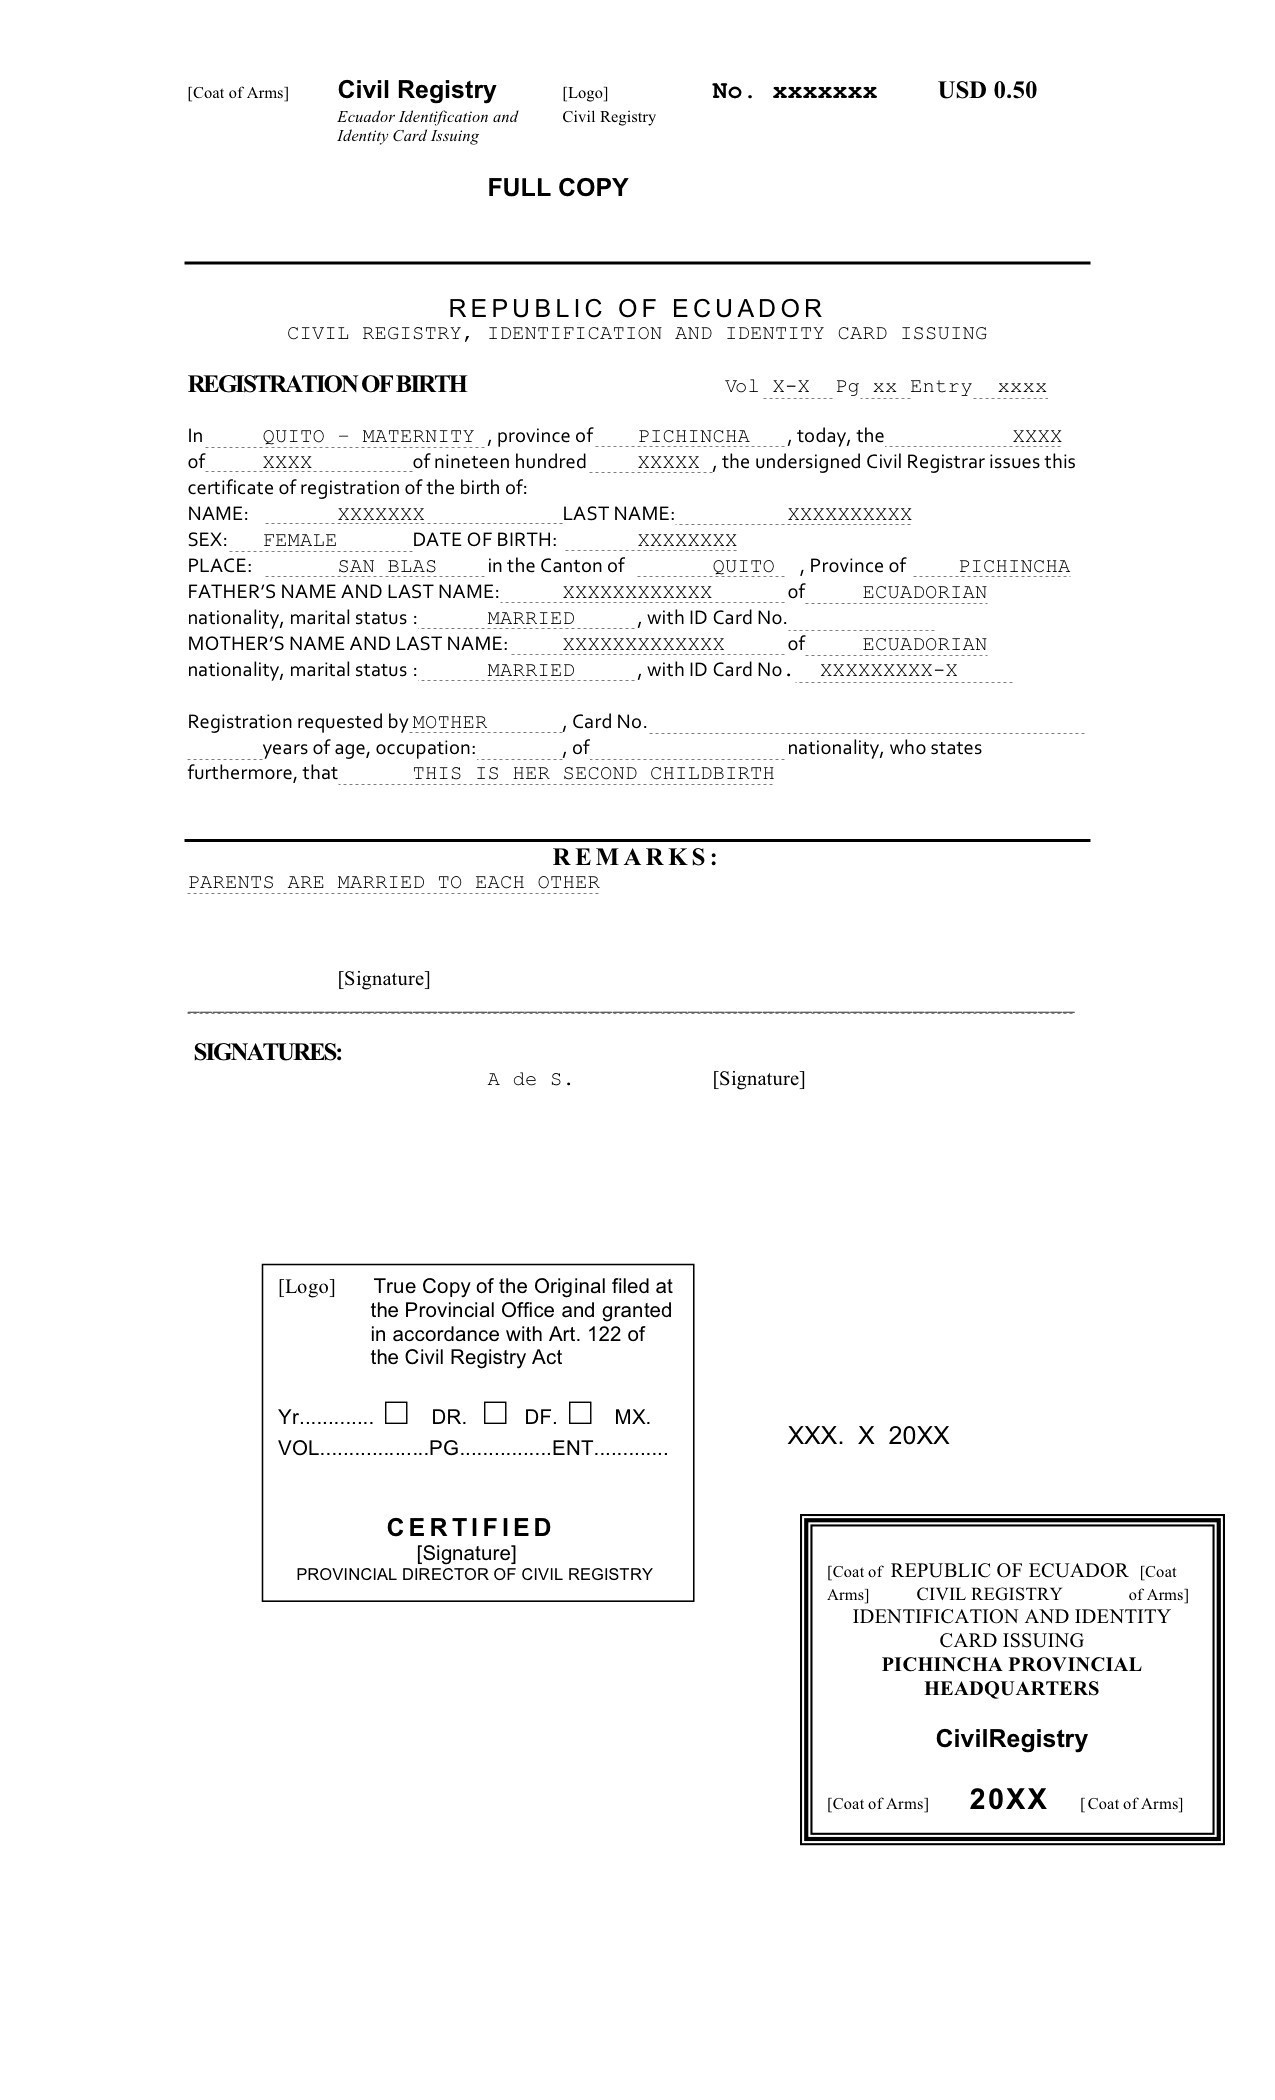 Death Certificate Translation From Spanish To English Sample Regarding Marriage Certificate Translation From Spanish To English Template